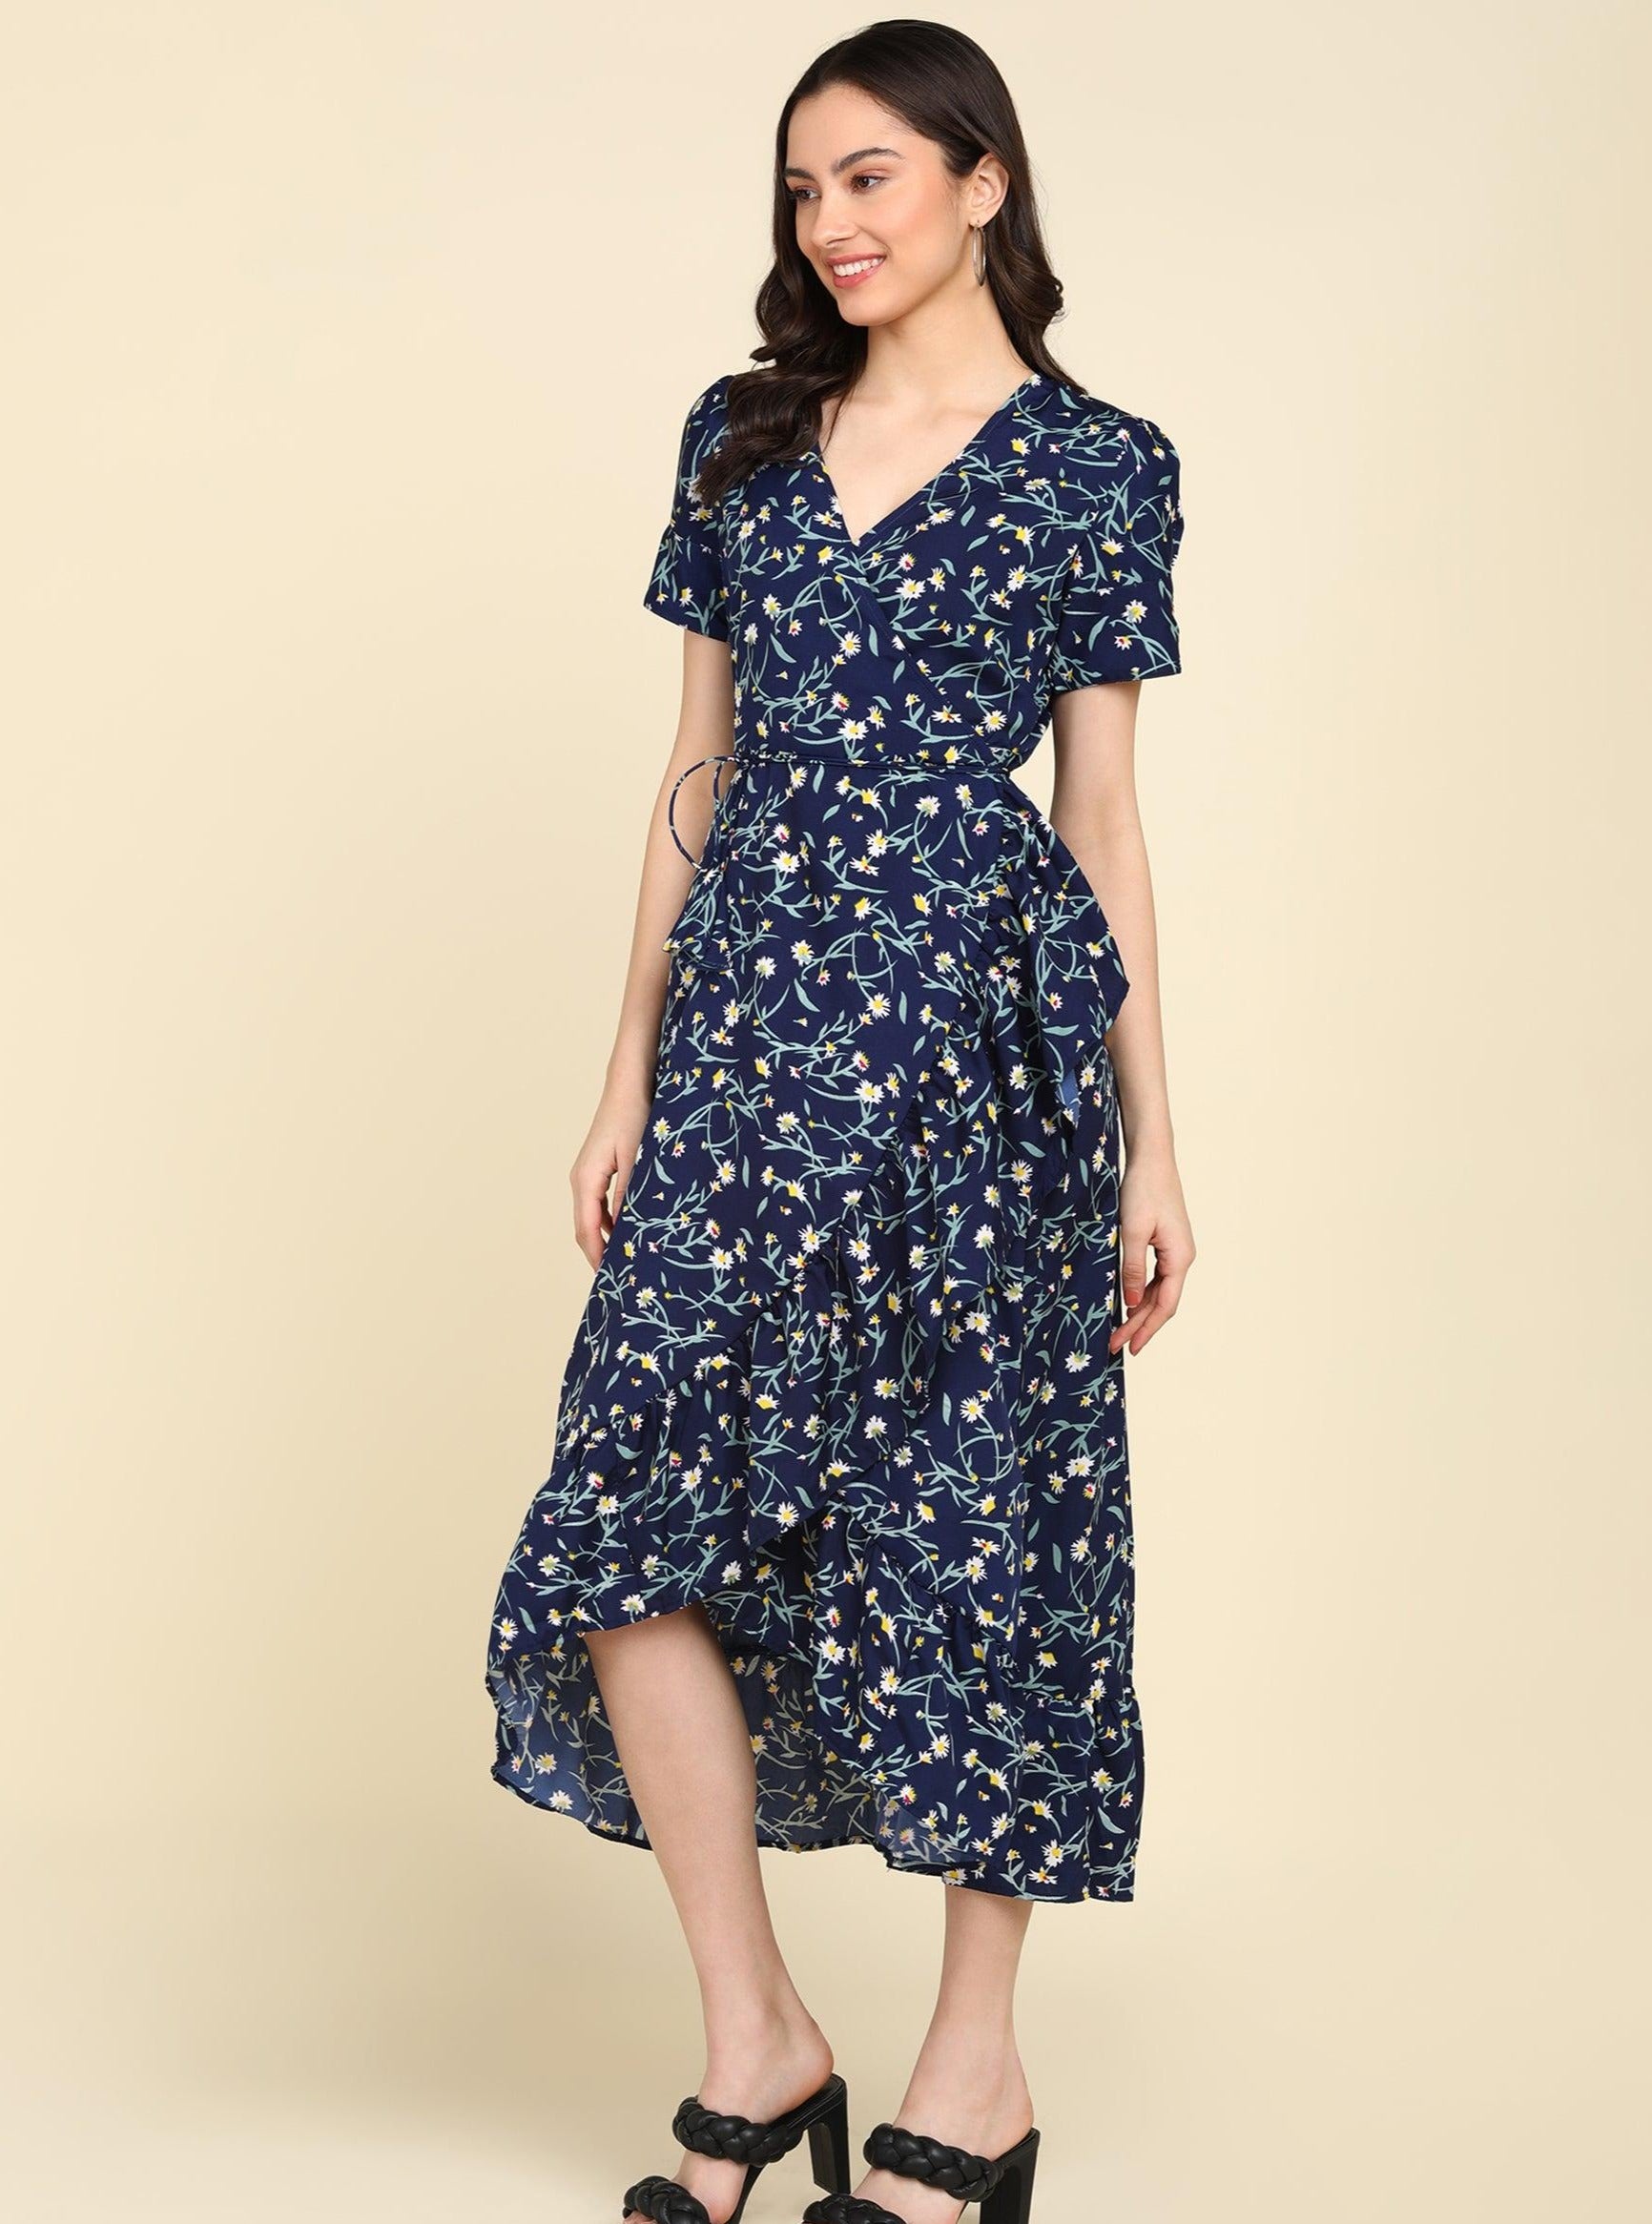 Blue Floral Printed Frill Dress - Znxclothing